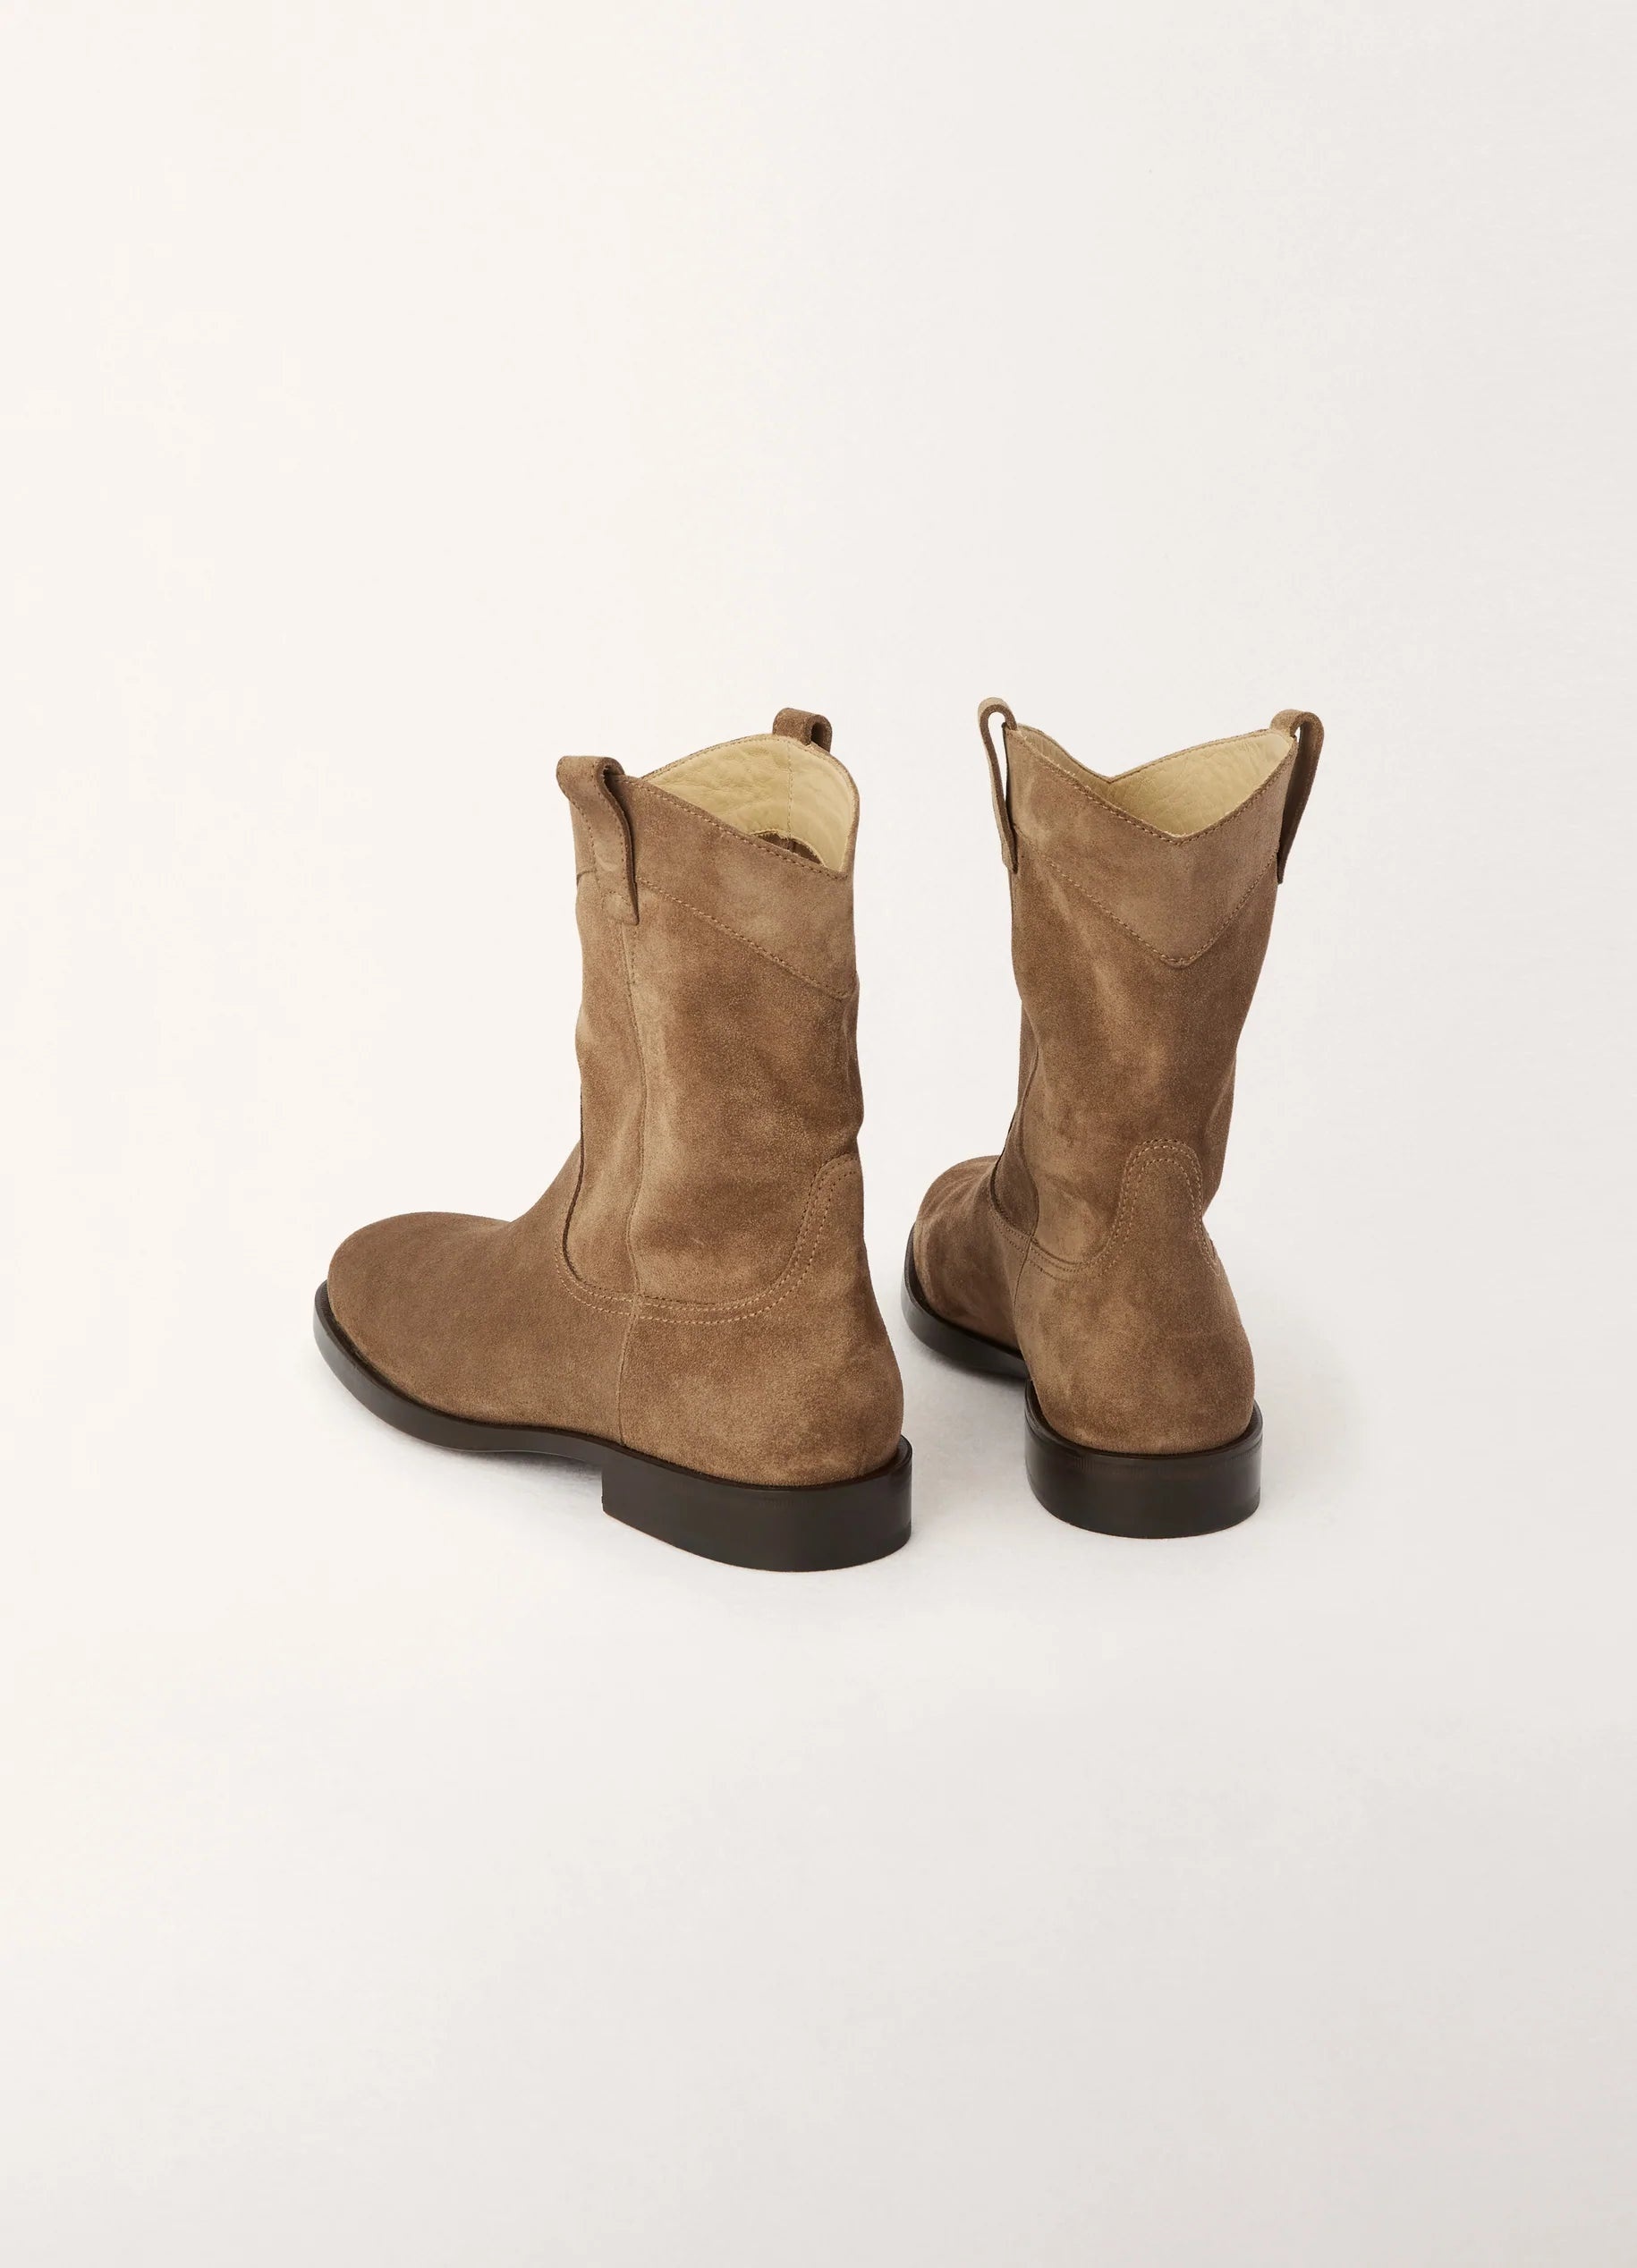 WESTERN BOOTS
WAXED SUEDE LTH - 4